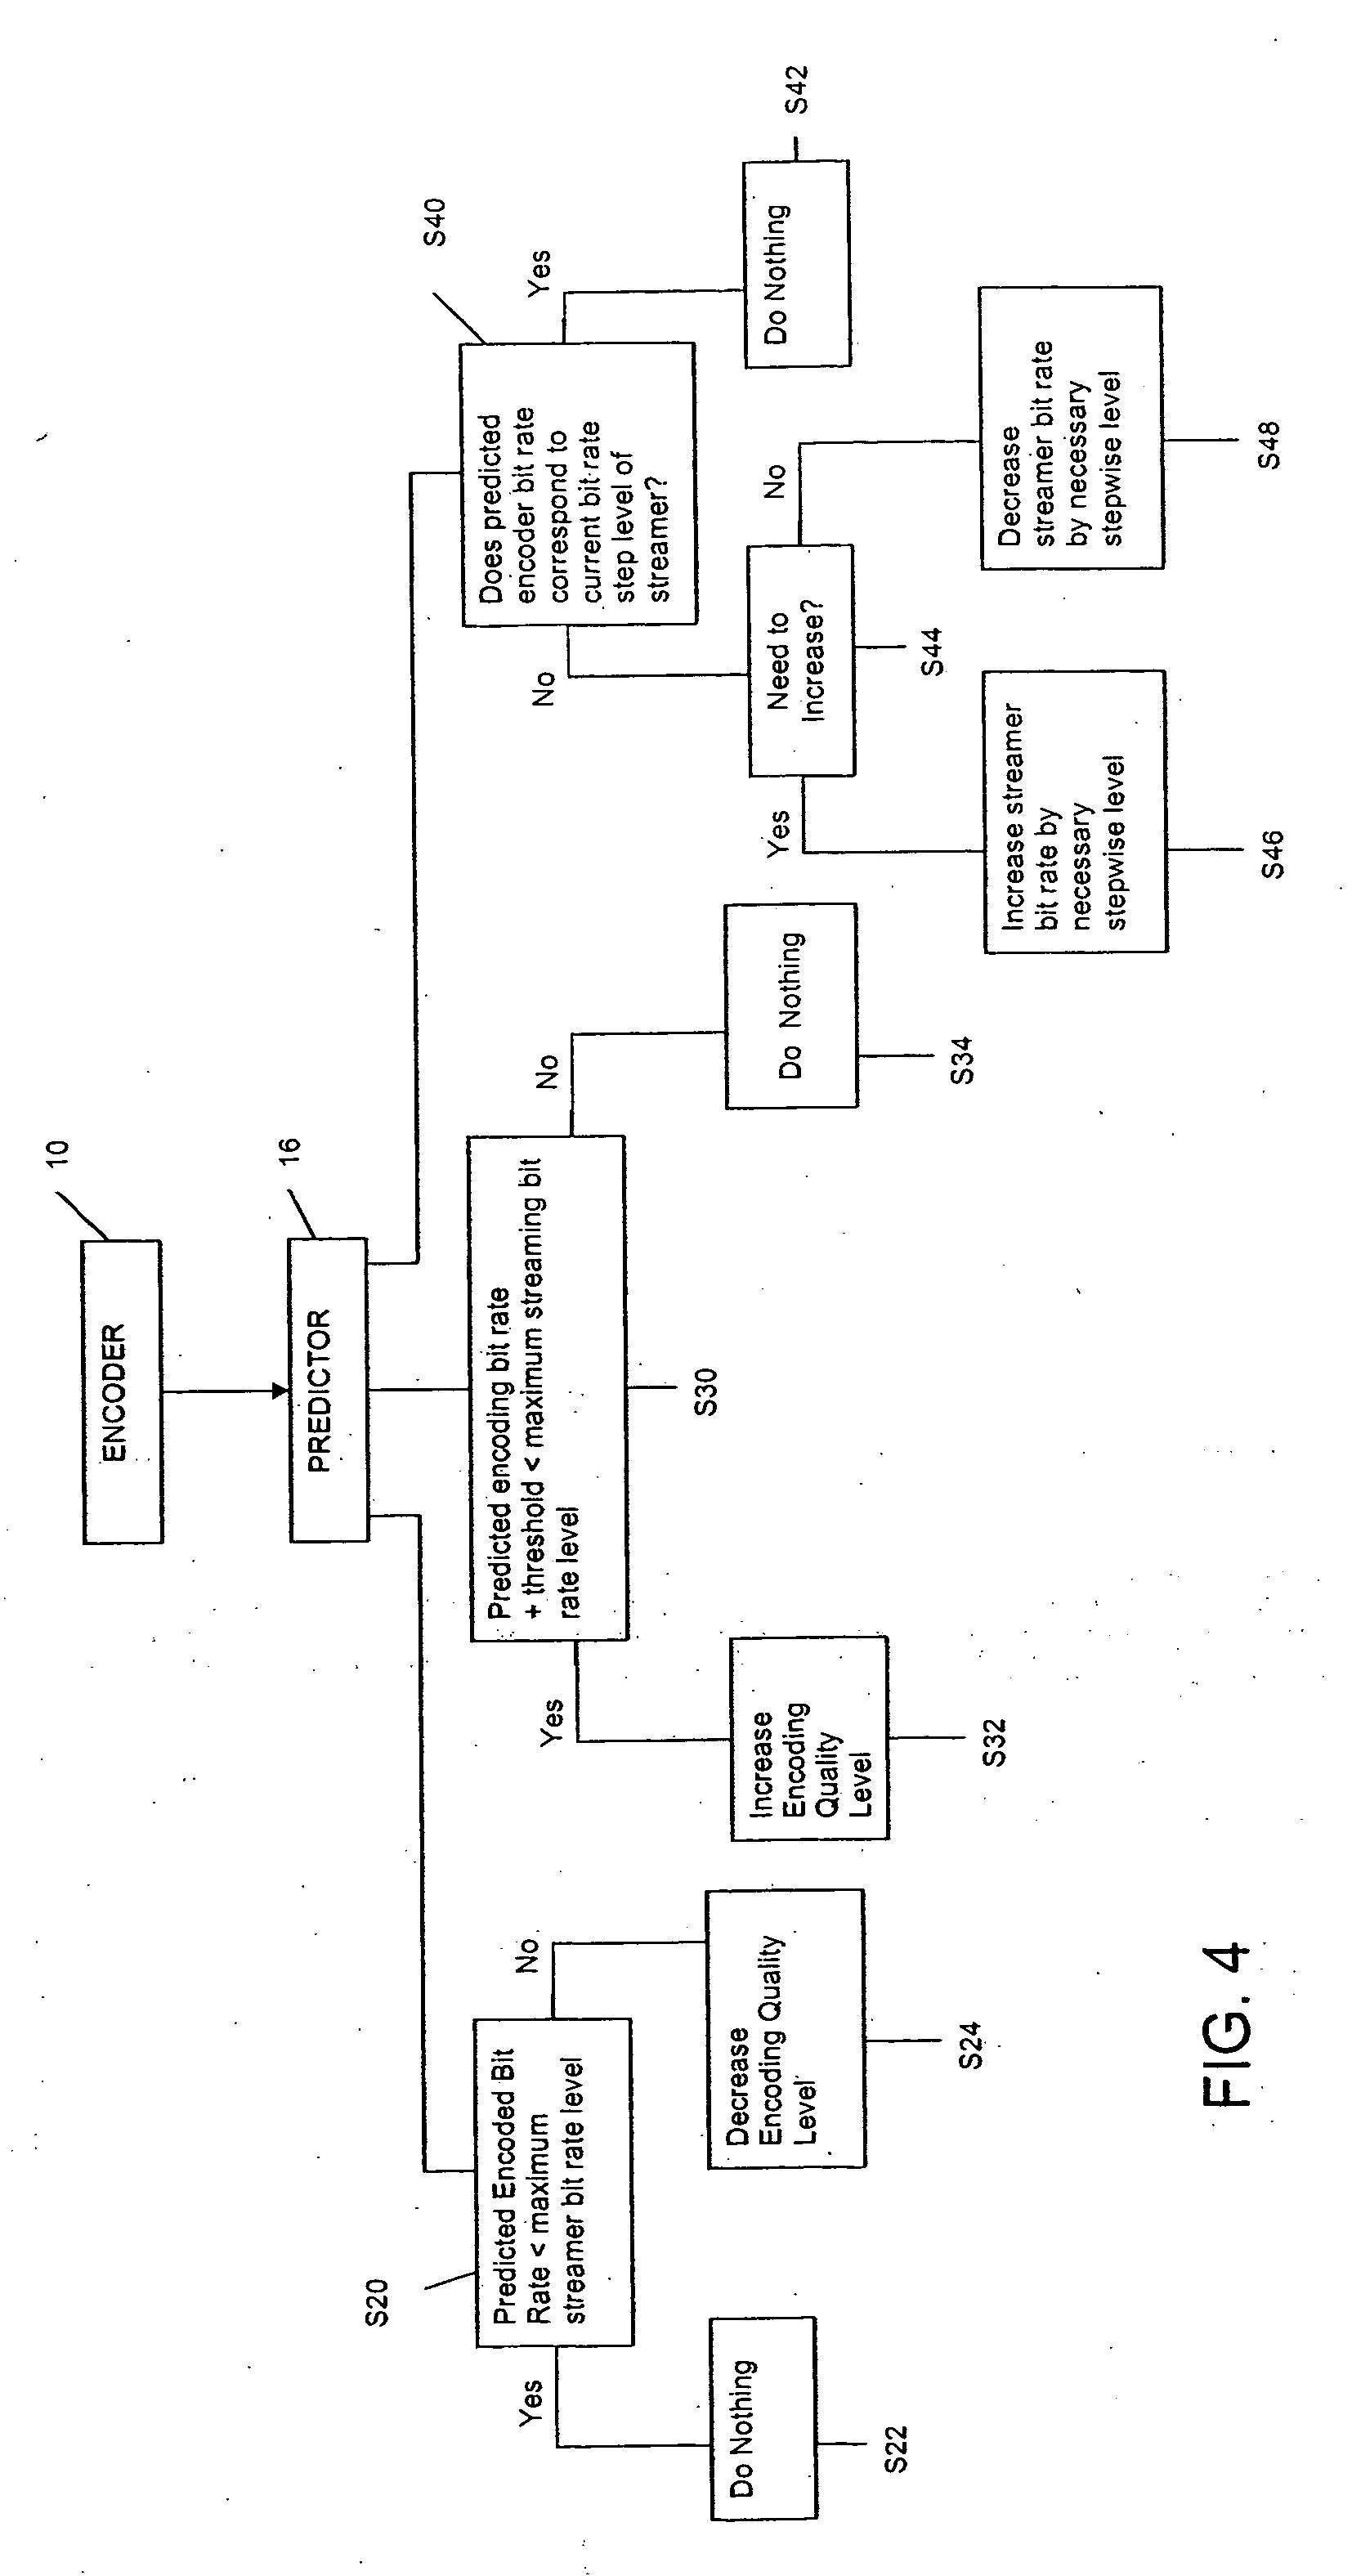 Method and apparatus for transmitting a coded video signal